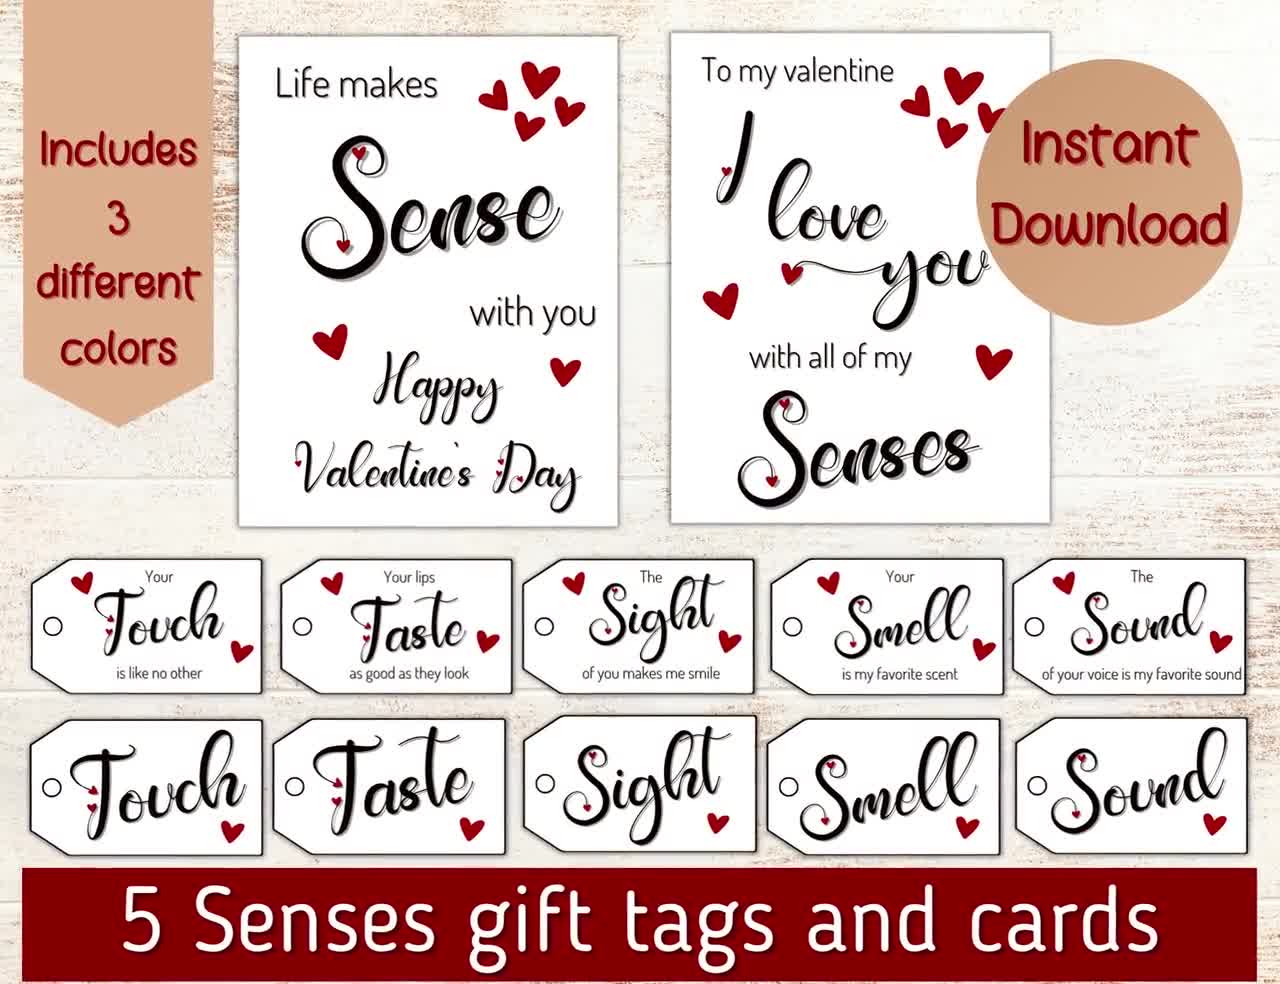 65+ Five Senses Gift Ideas for Him and Her | Love cards for him, Boyfriend  anniversary gifts, Boyfriend gifts